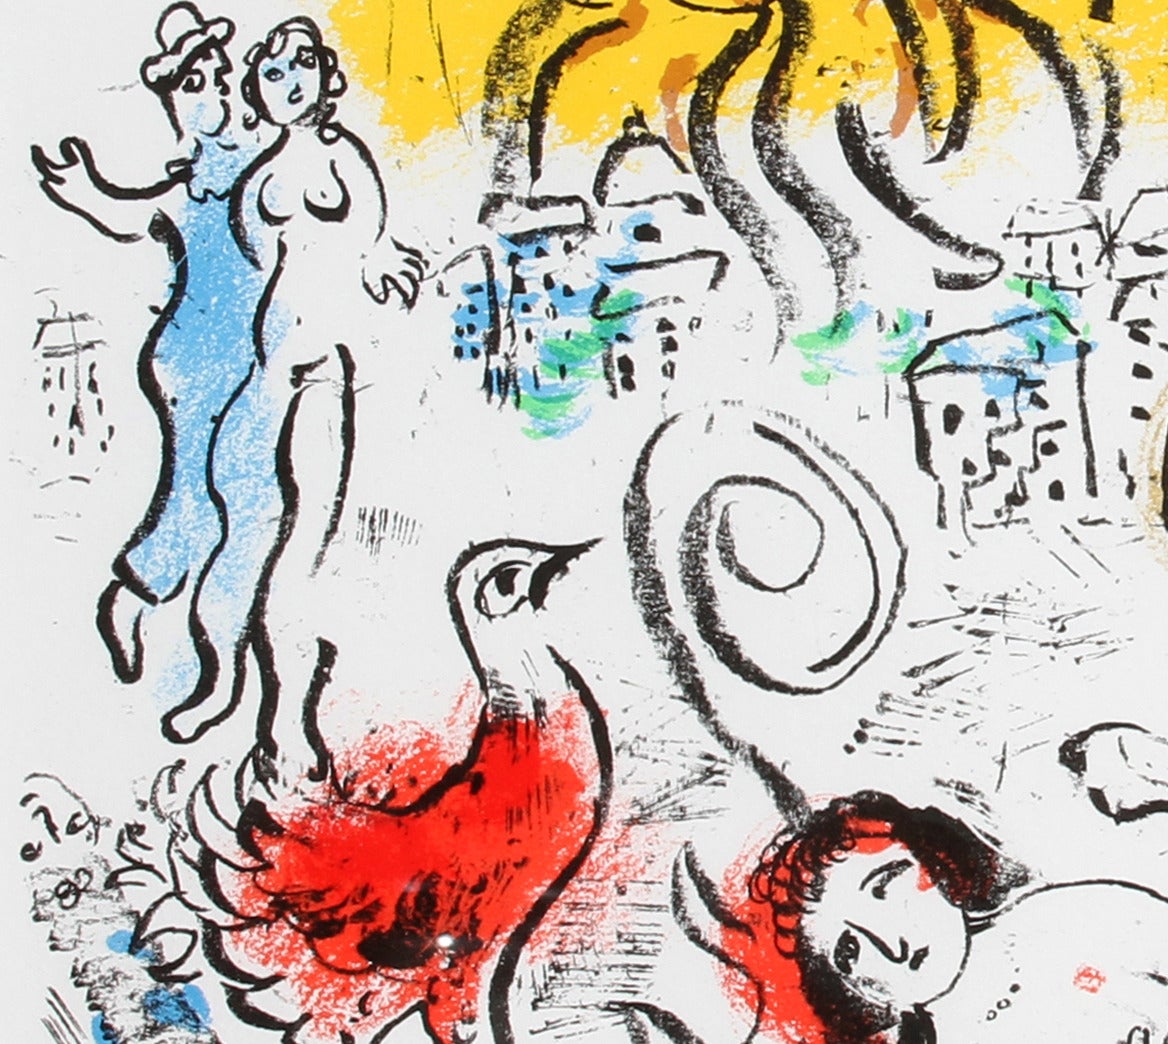 Artist: Marc Chagall, Russian (1887 - 1985)
Title: Homecoming from XXe Siecle. Chagall Monumental
Year: 1973
Medium: Lithograph 
Edition: 10,000
Size: 12.25 in. x 18.875 in. (31 cm x 48 cm)
Frame: 21.5 x 27 inches

Printer: Mourlot Freres, Paris